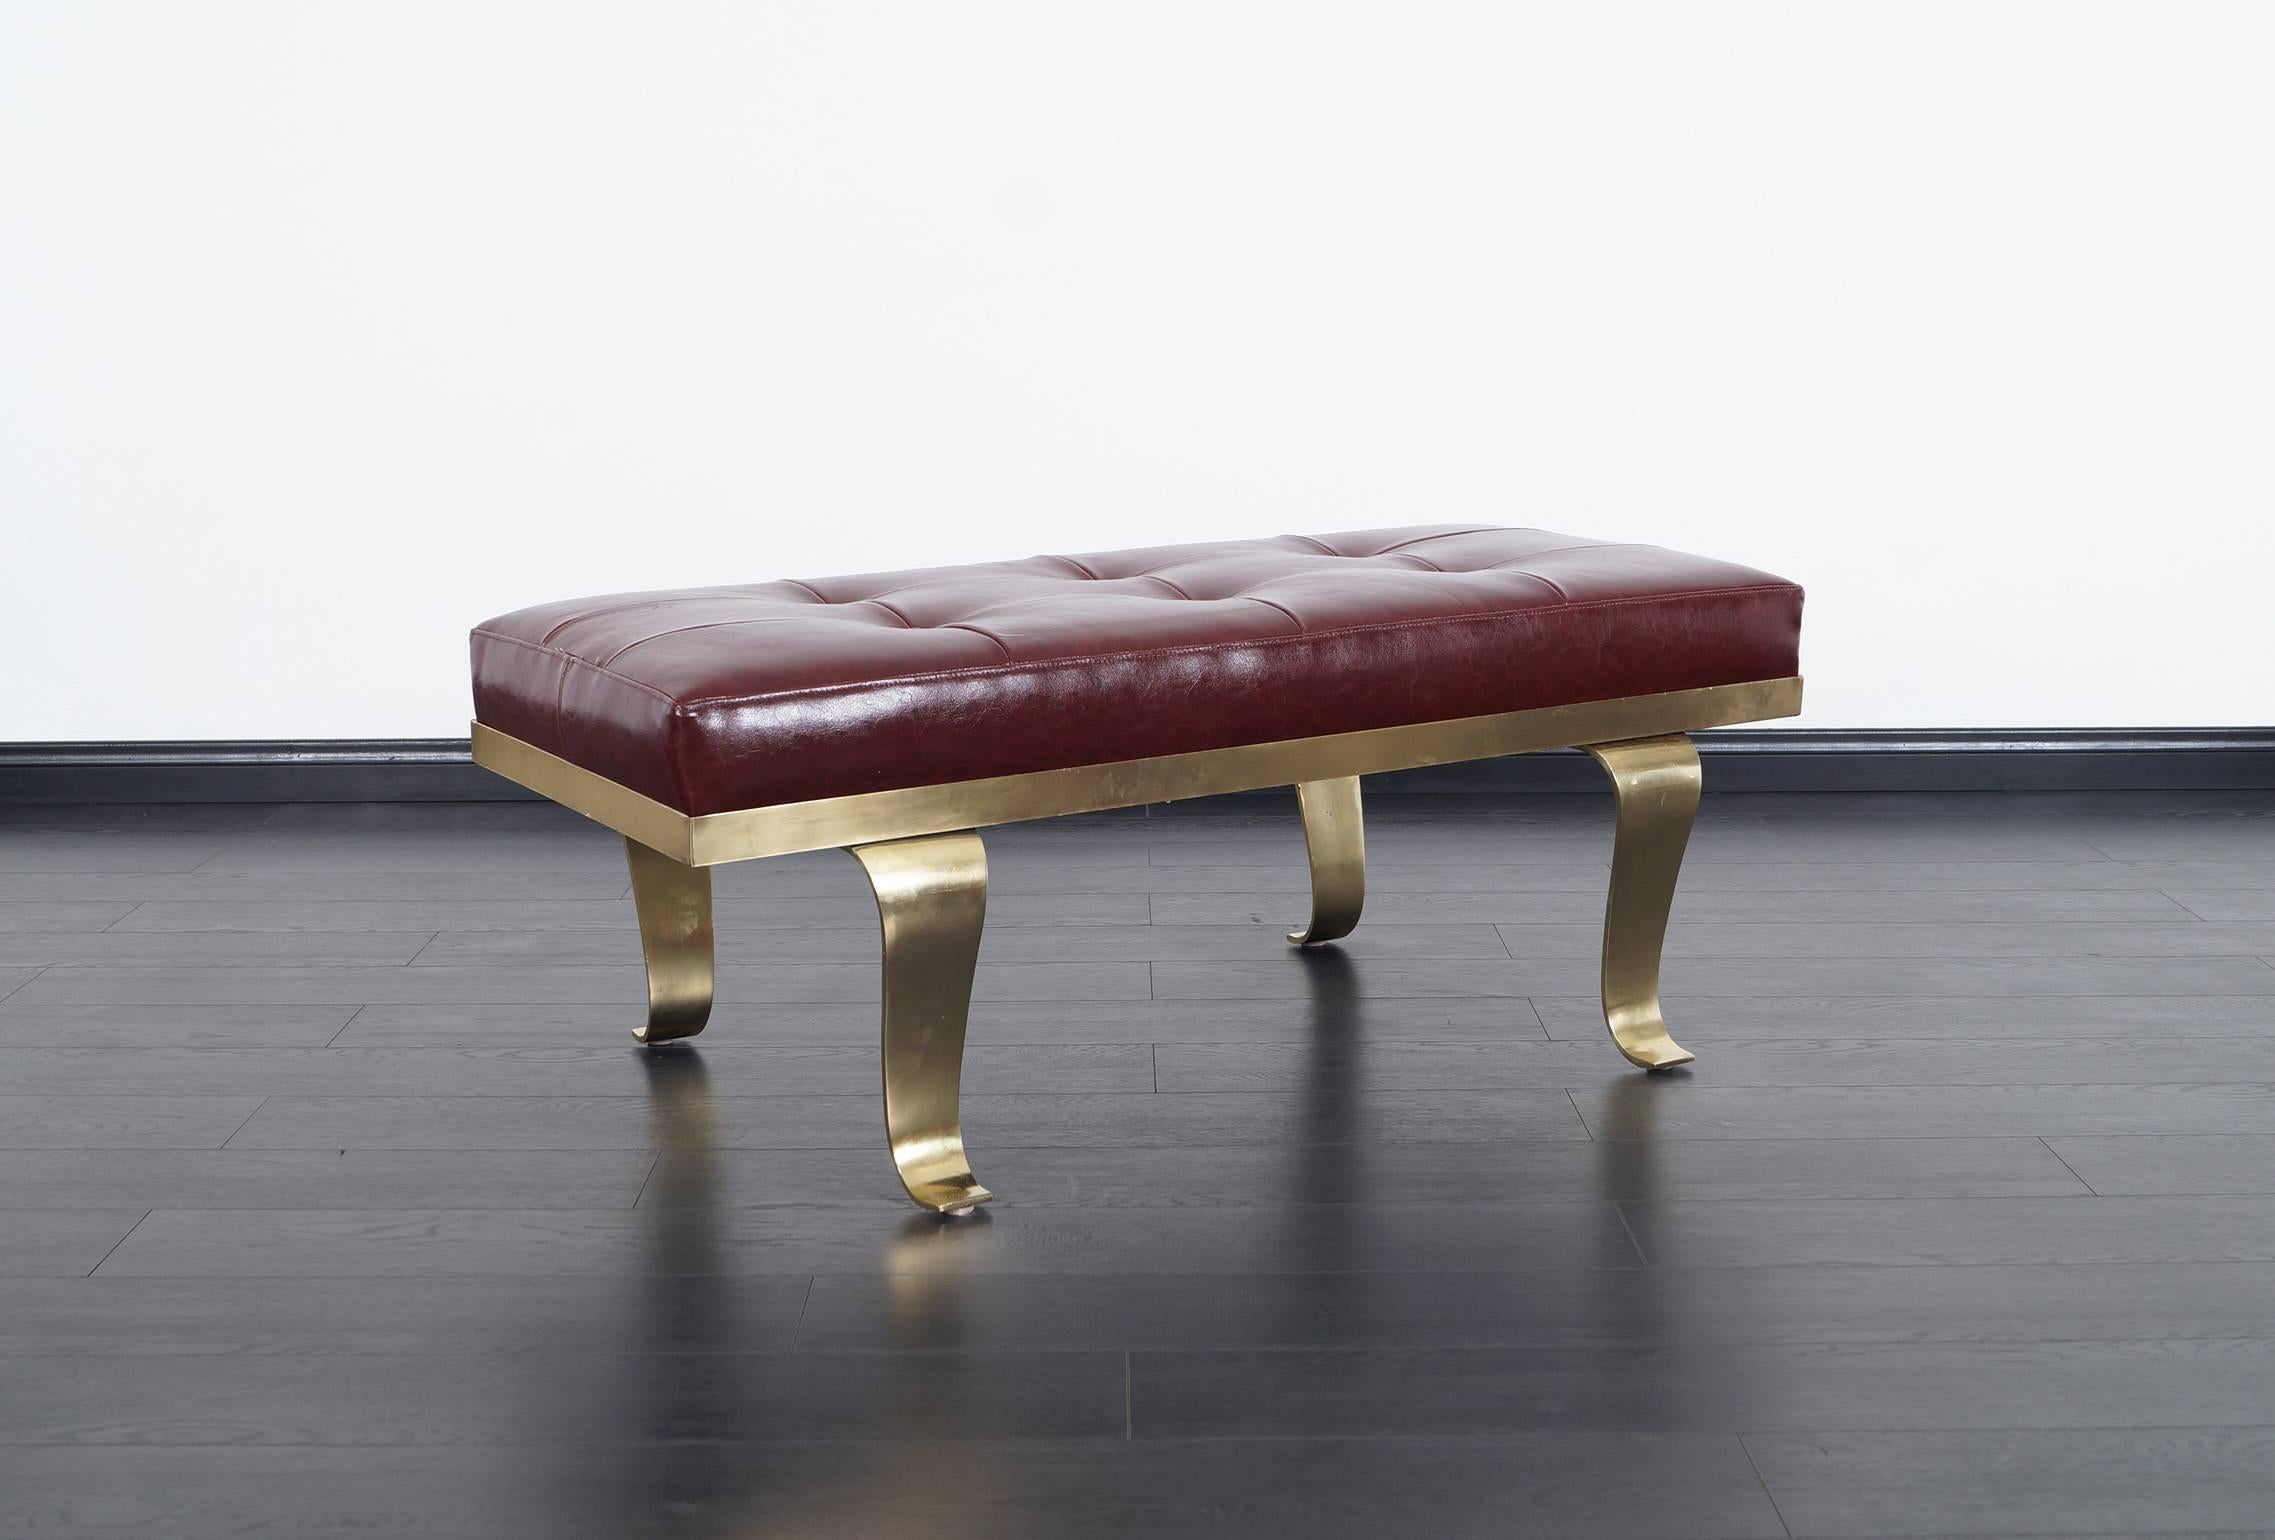 Stunning vintage brass and leather bench attributed to Arturo Pani. This exceptional bench exposes fabulous architectural curved legs.